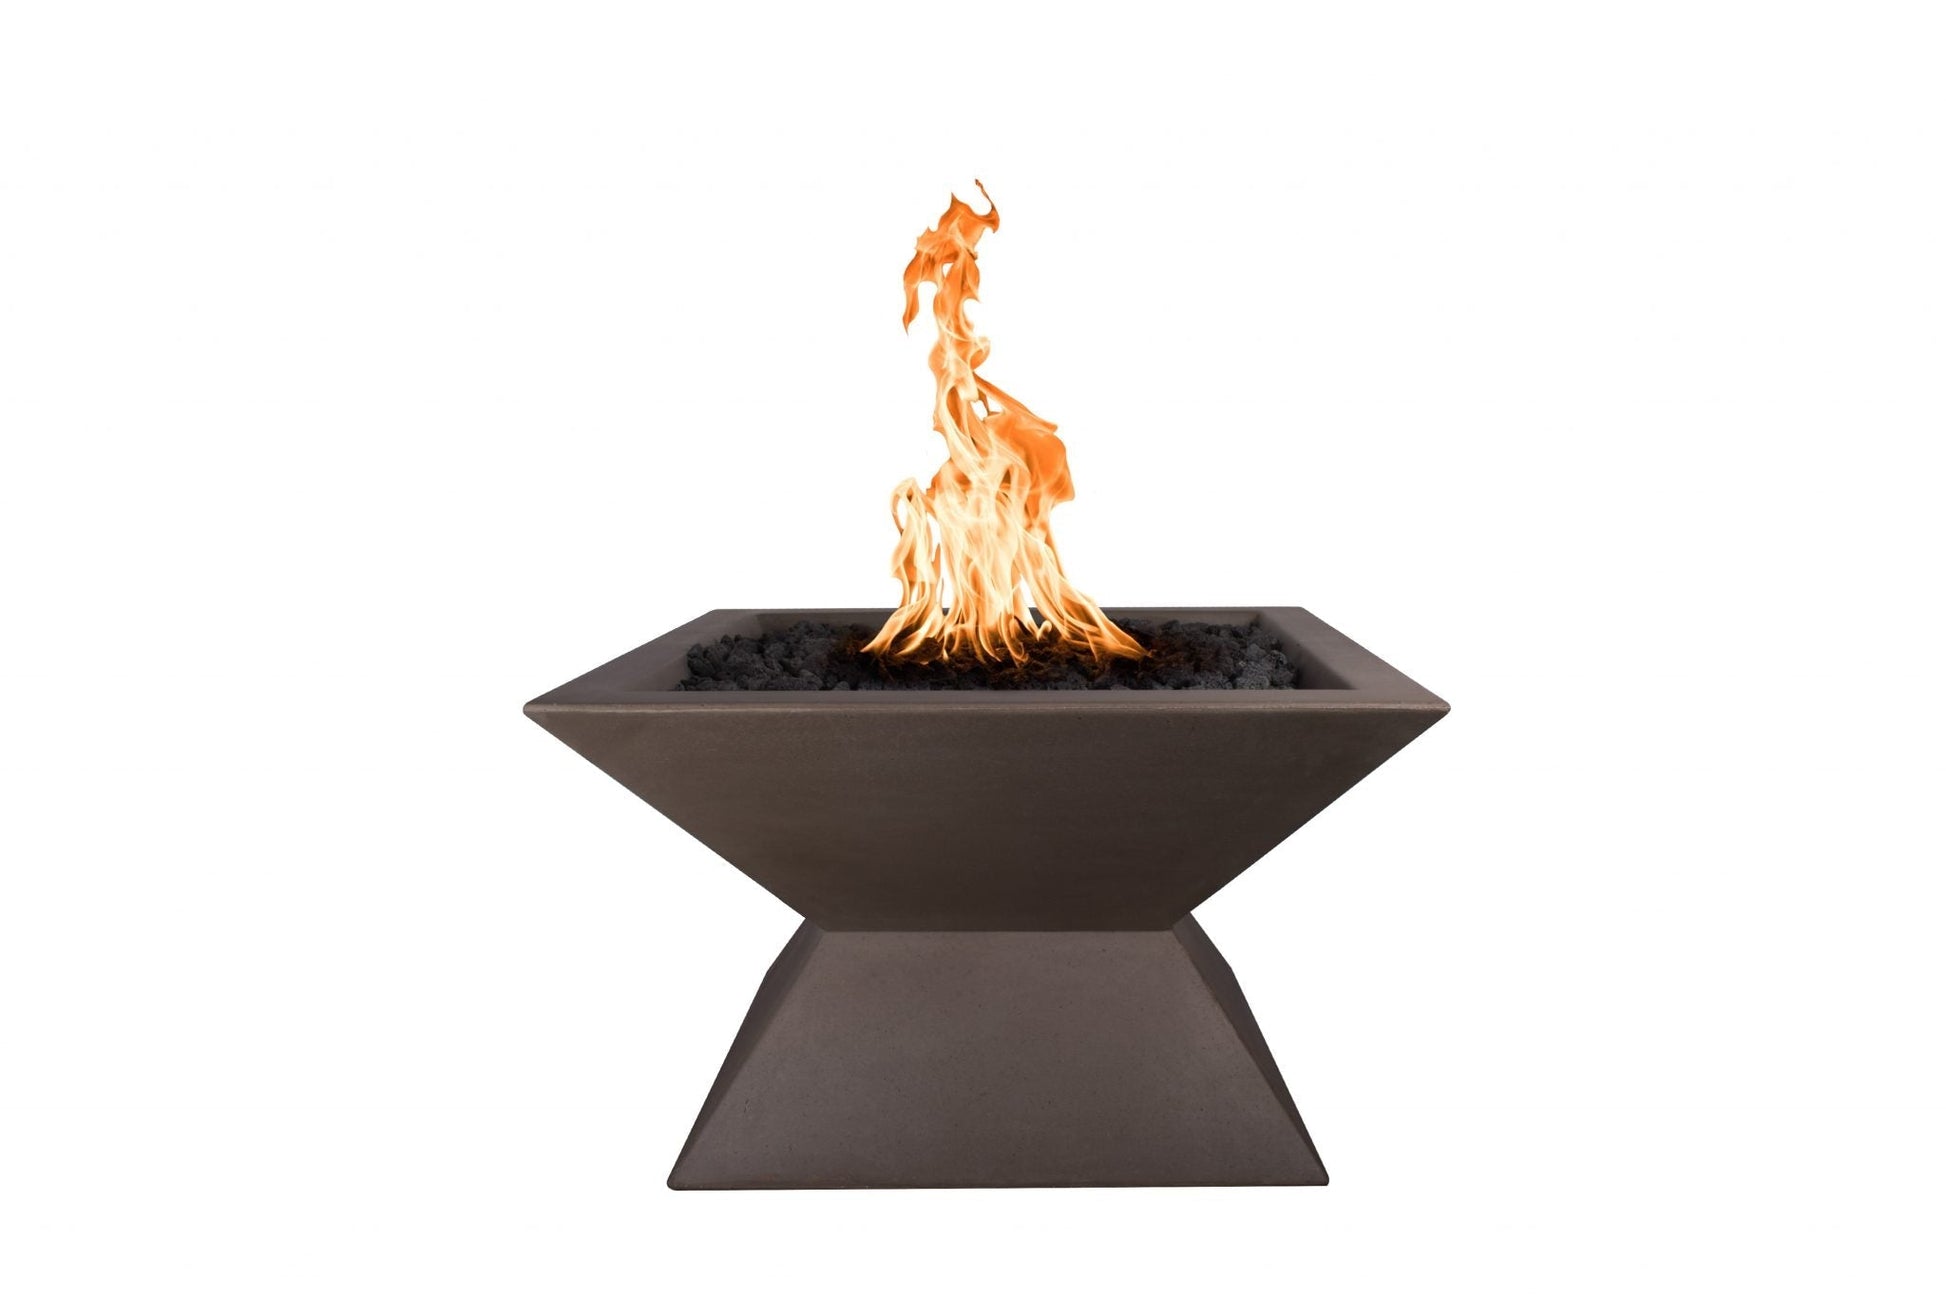 The Outdoor Plus Square Uxmal 30" Metallic Copper GFRC Concrete Liquid Propane Fire Pit with 12V Electronic Ignition